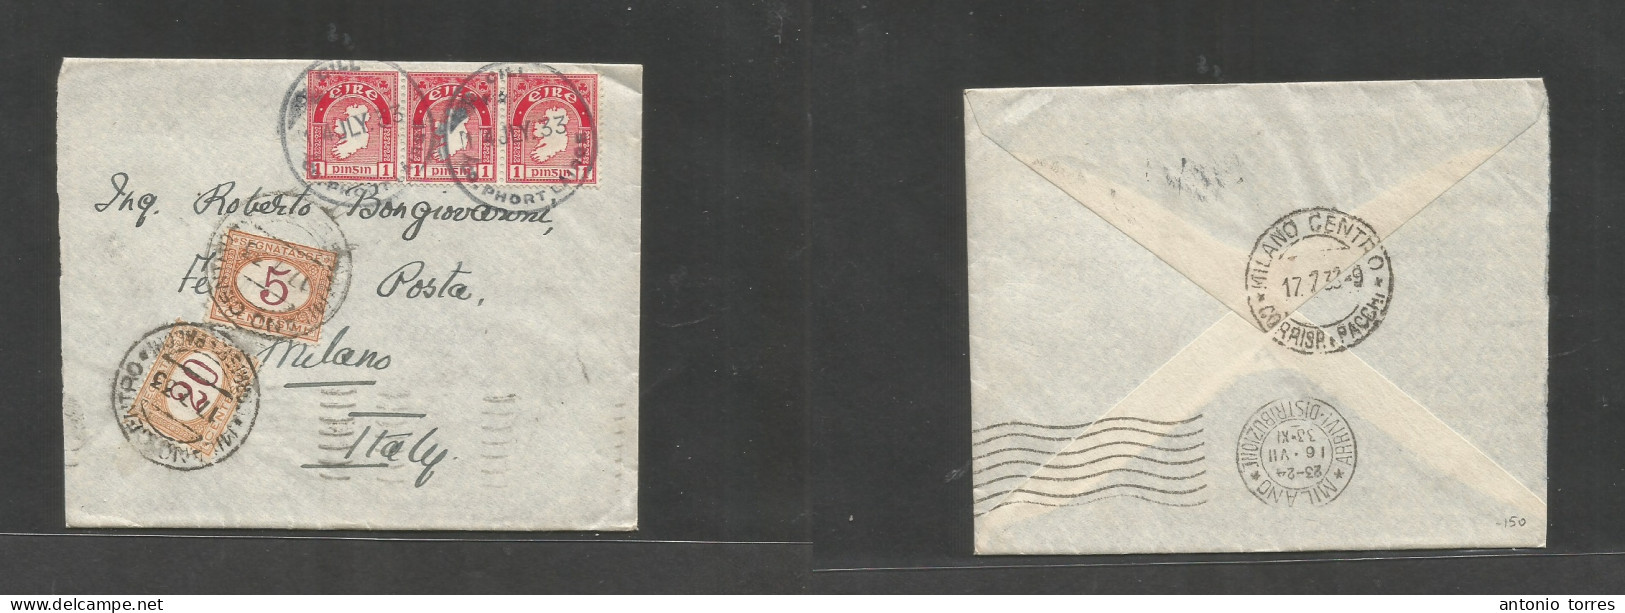 Eire. 1933 (14 July) Gill, Co. Phort Lairge - Italy, Milano (17 July). Multifkd Env At 3d Rate, Poste Restante + (2x). I - Used Stamps